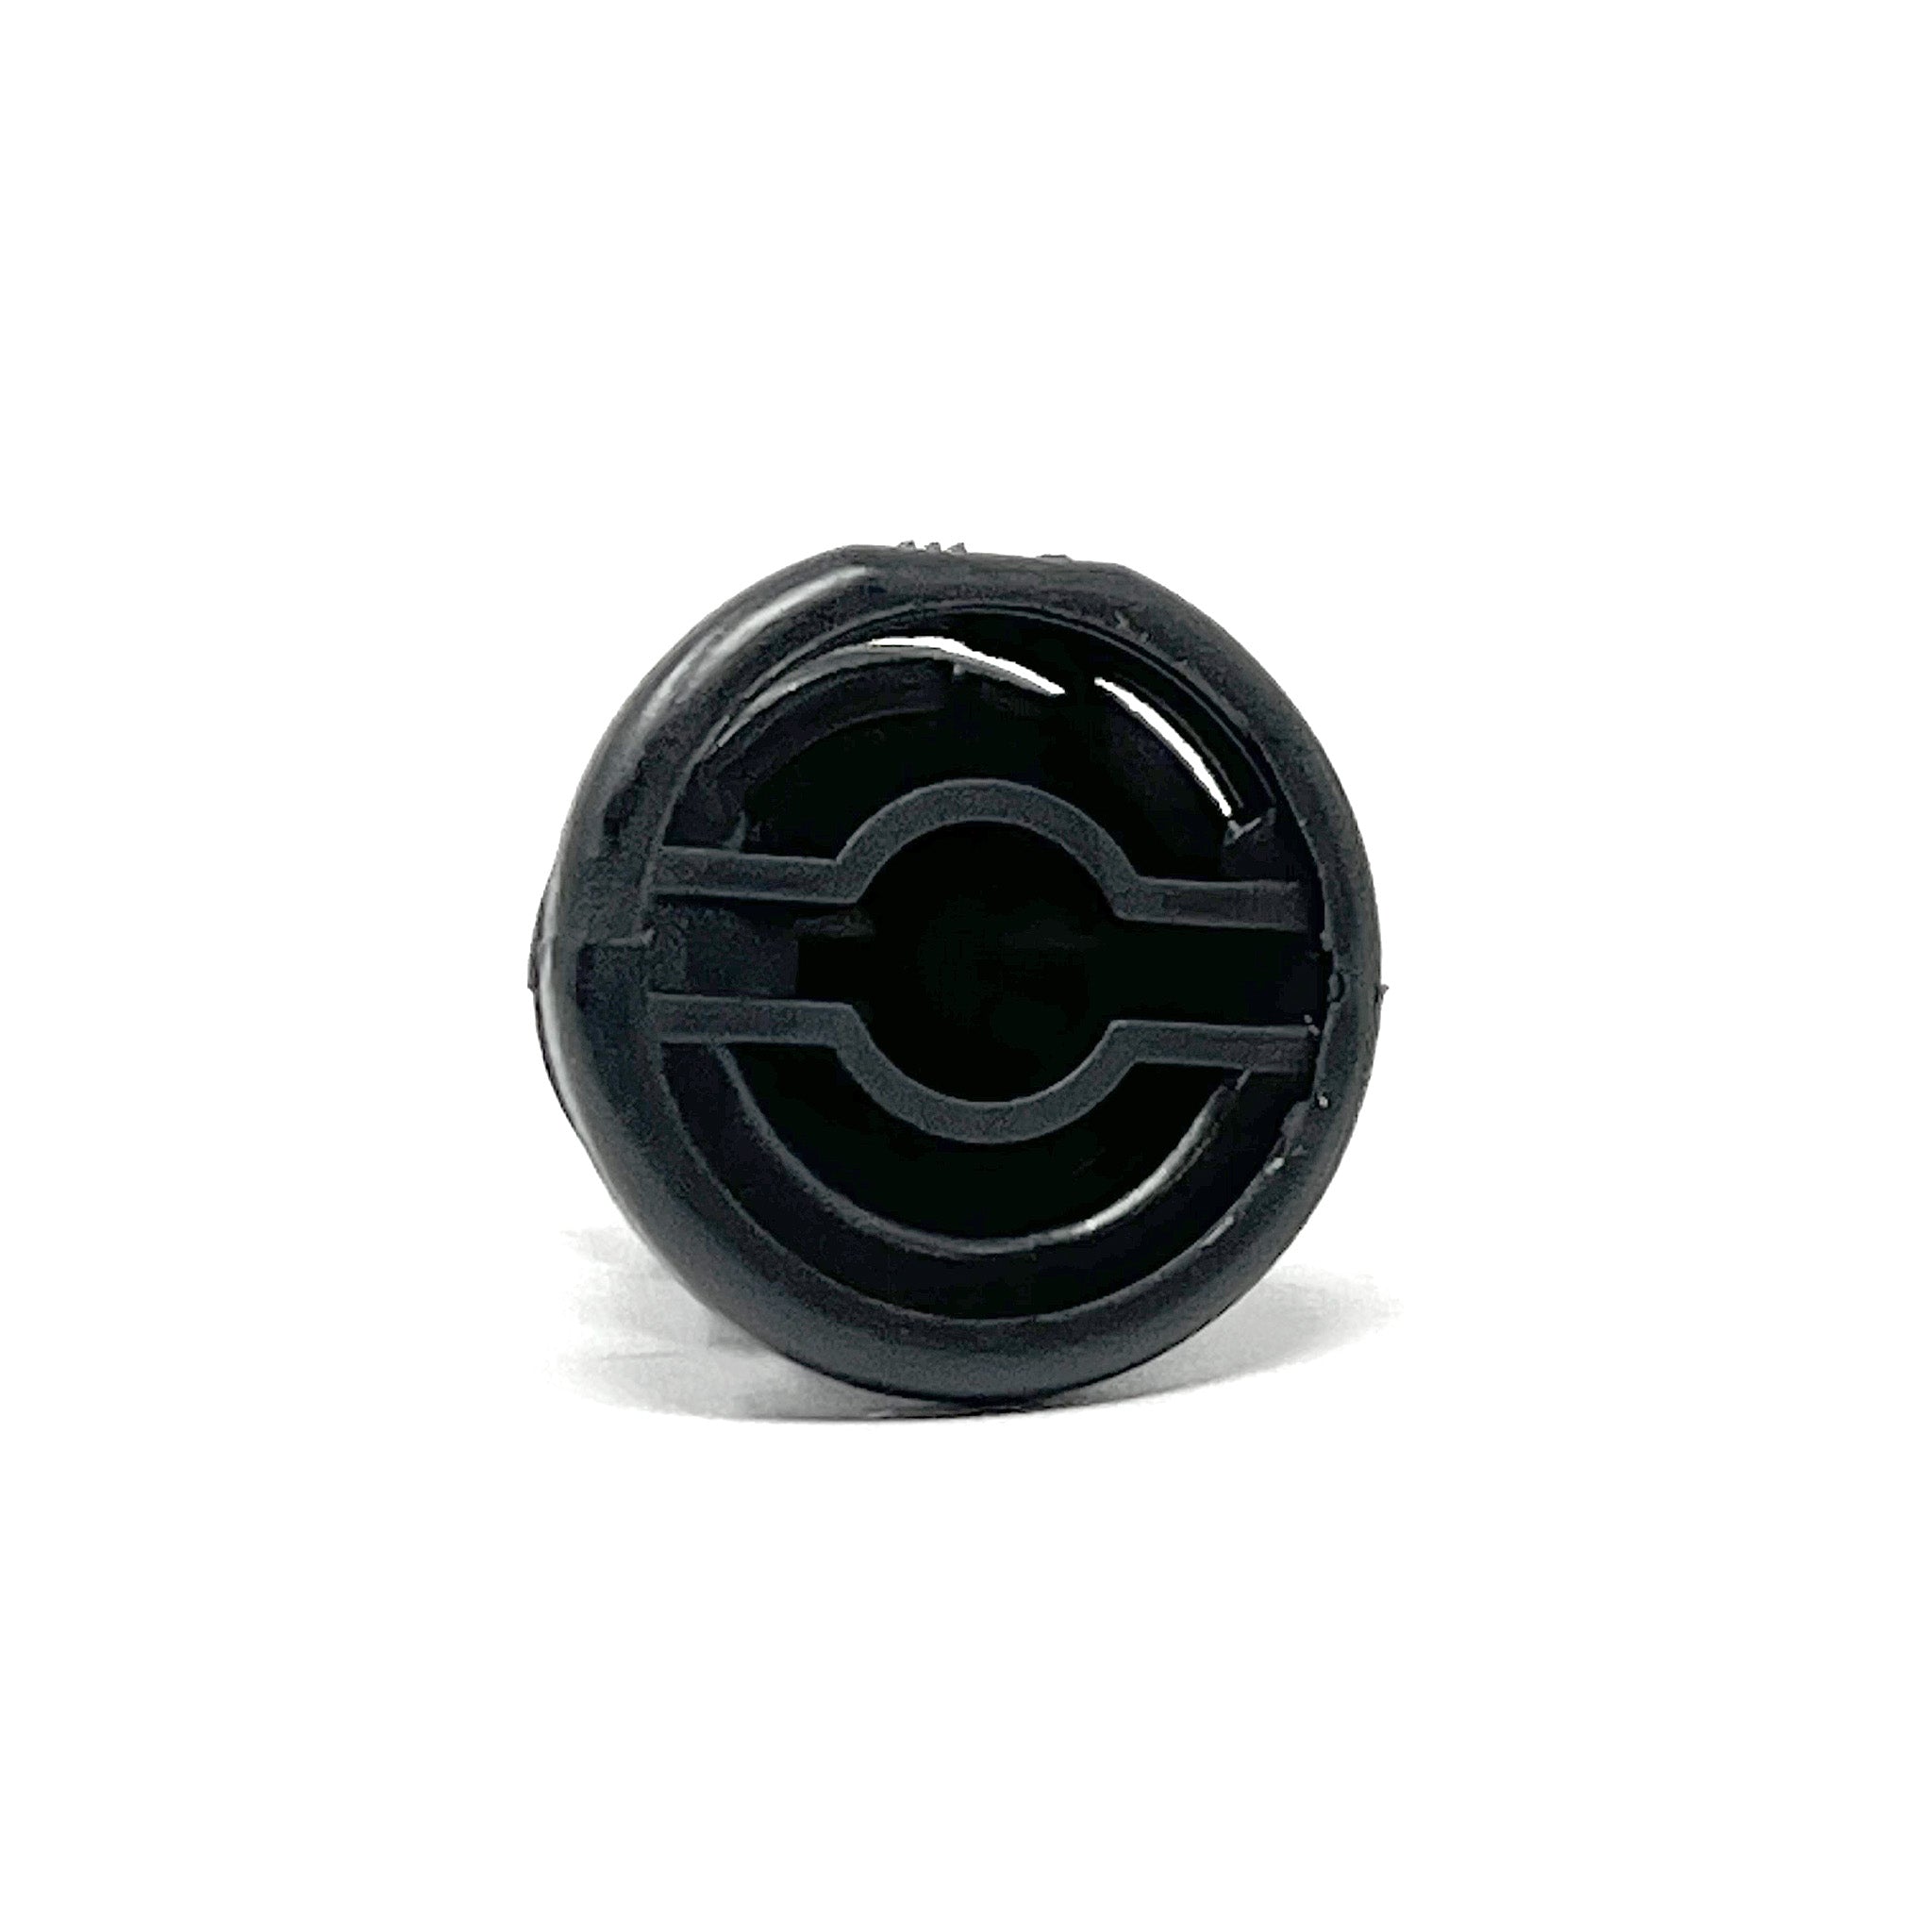 Plastic Black Specialty Drain Plug for VW and Audi